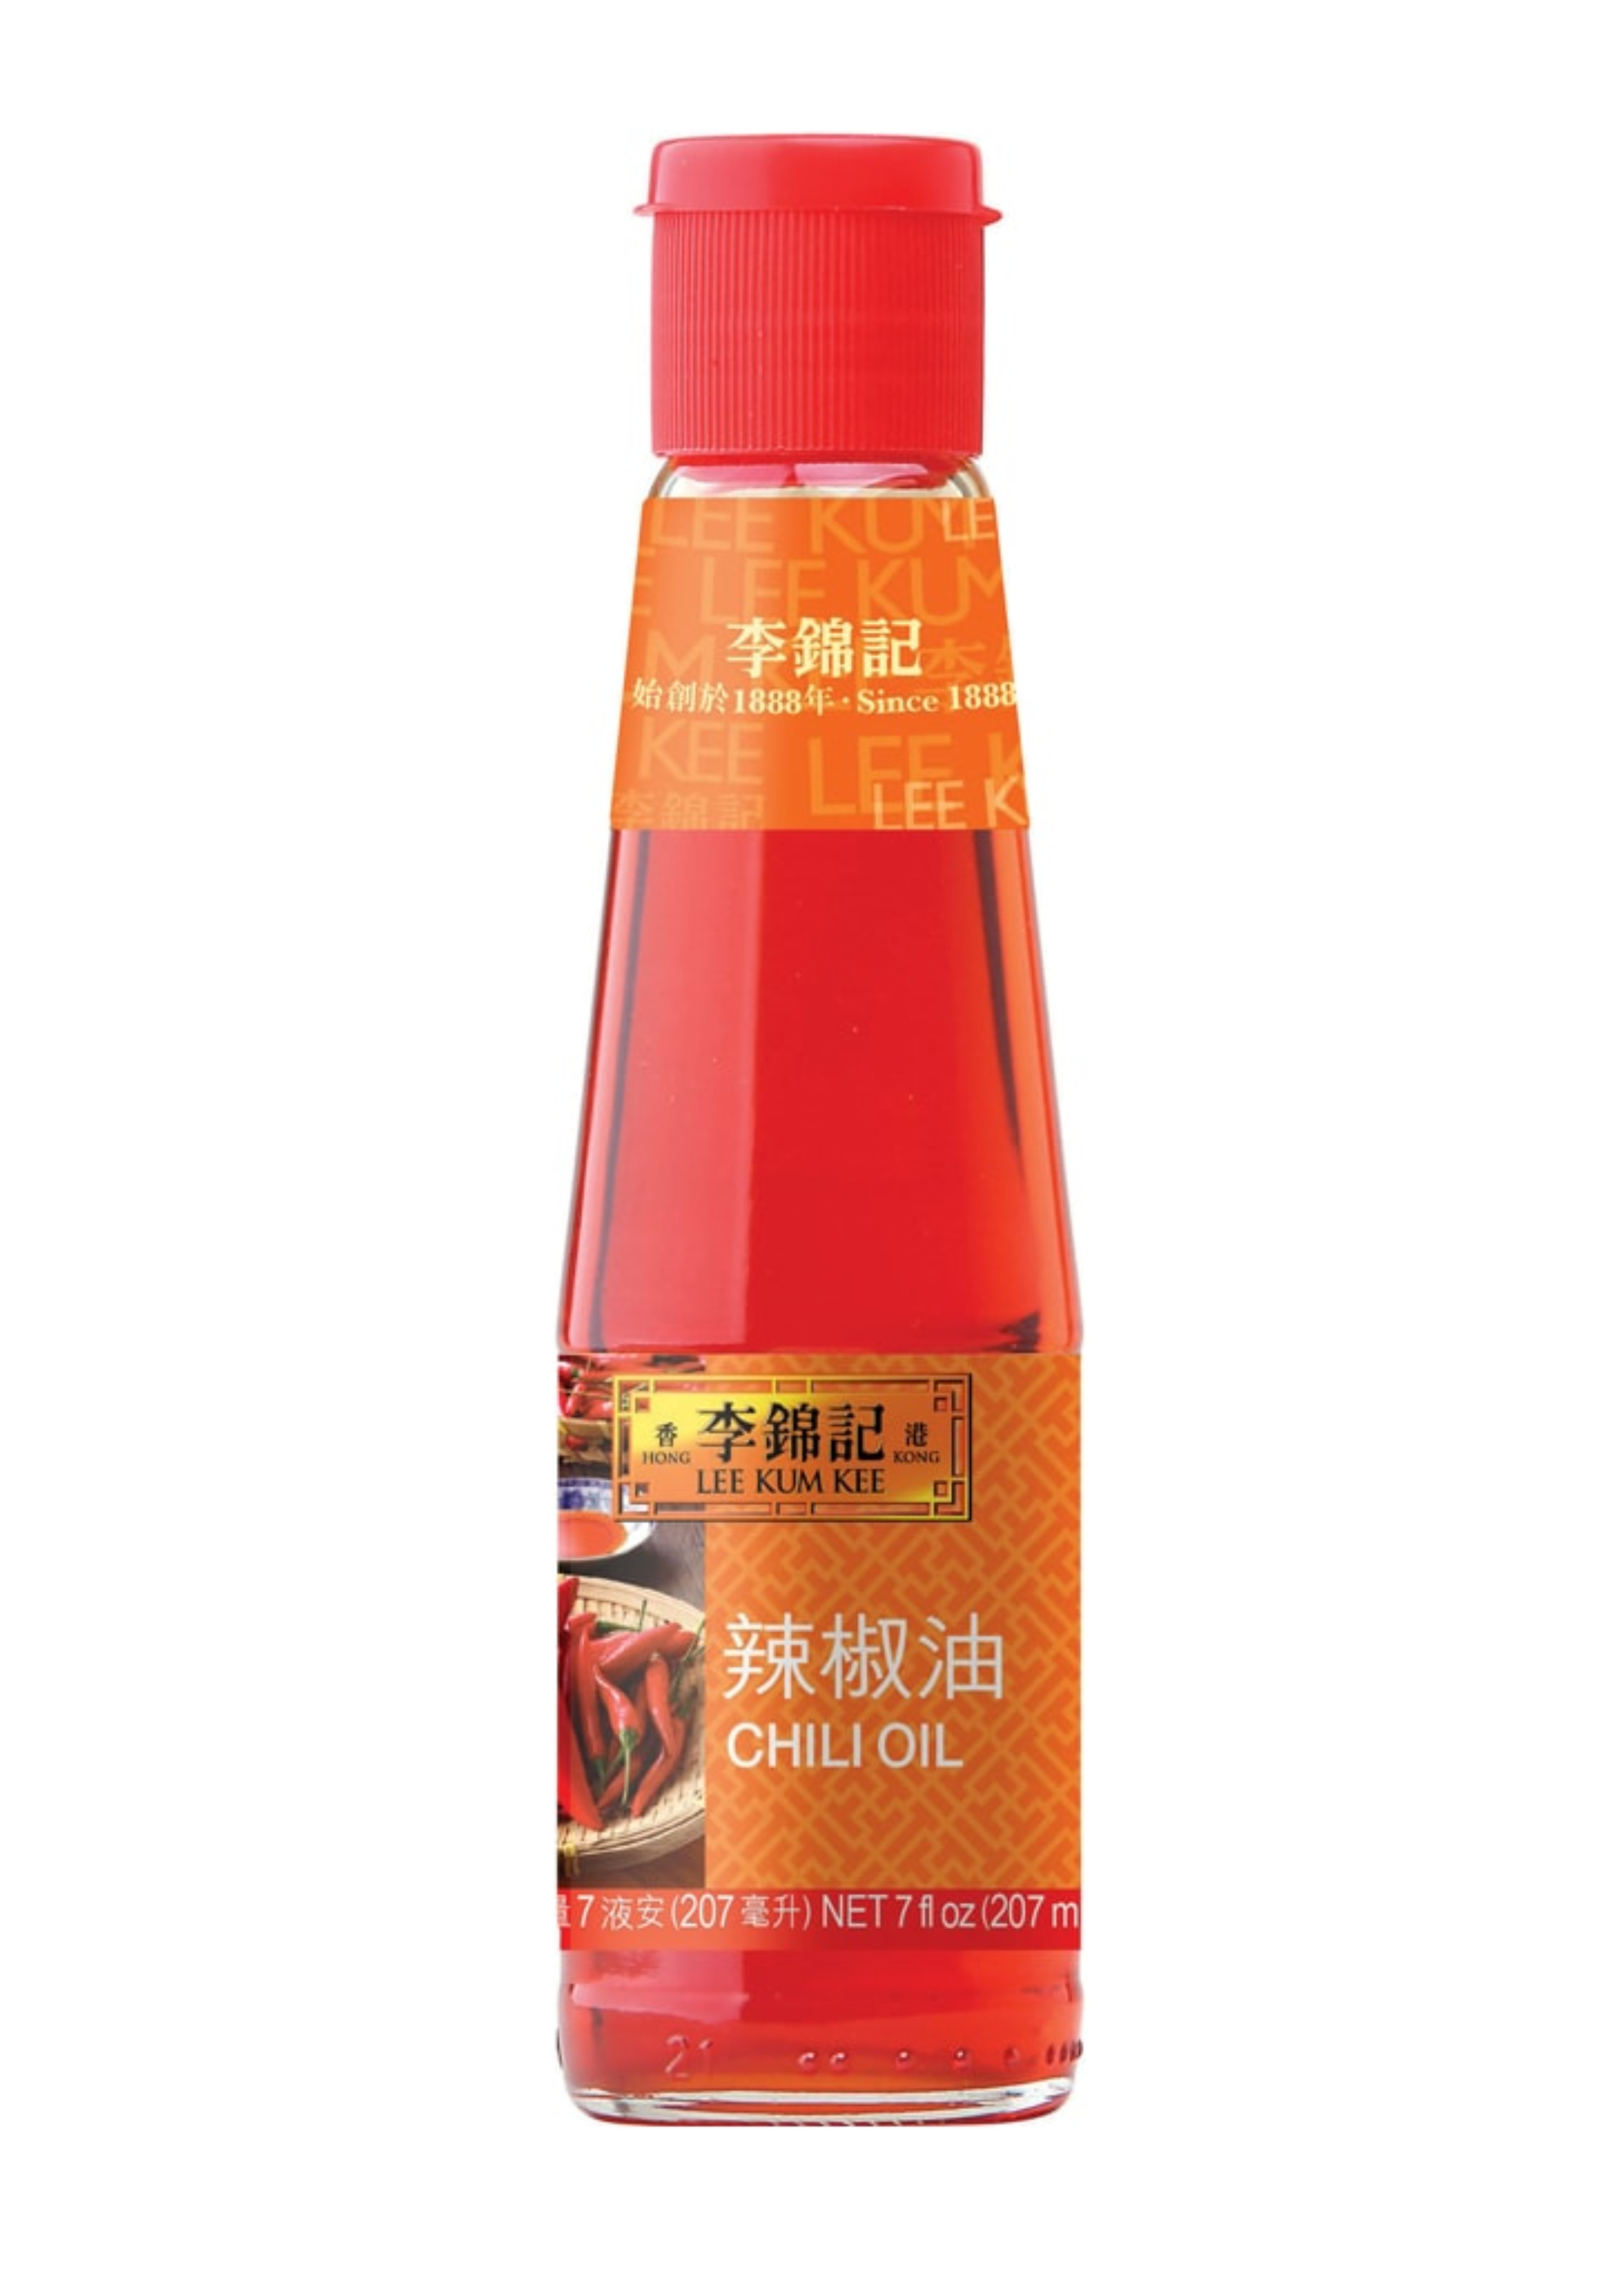 Chilli Oil | Chinese Chilli Oil | Lee Kum Kee | India